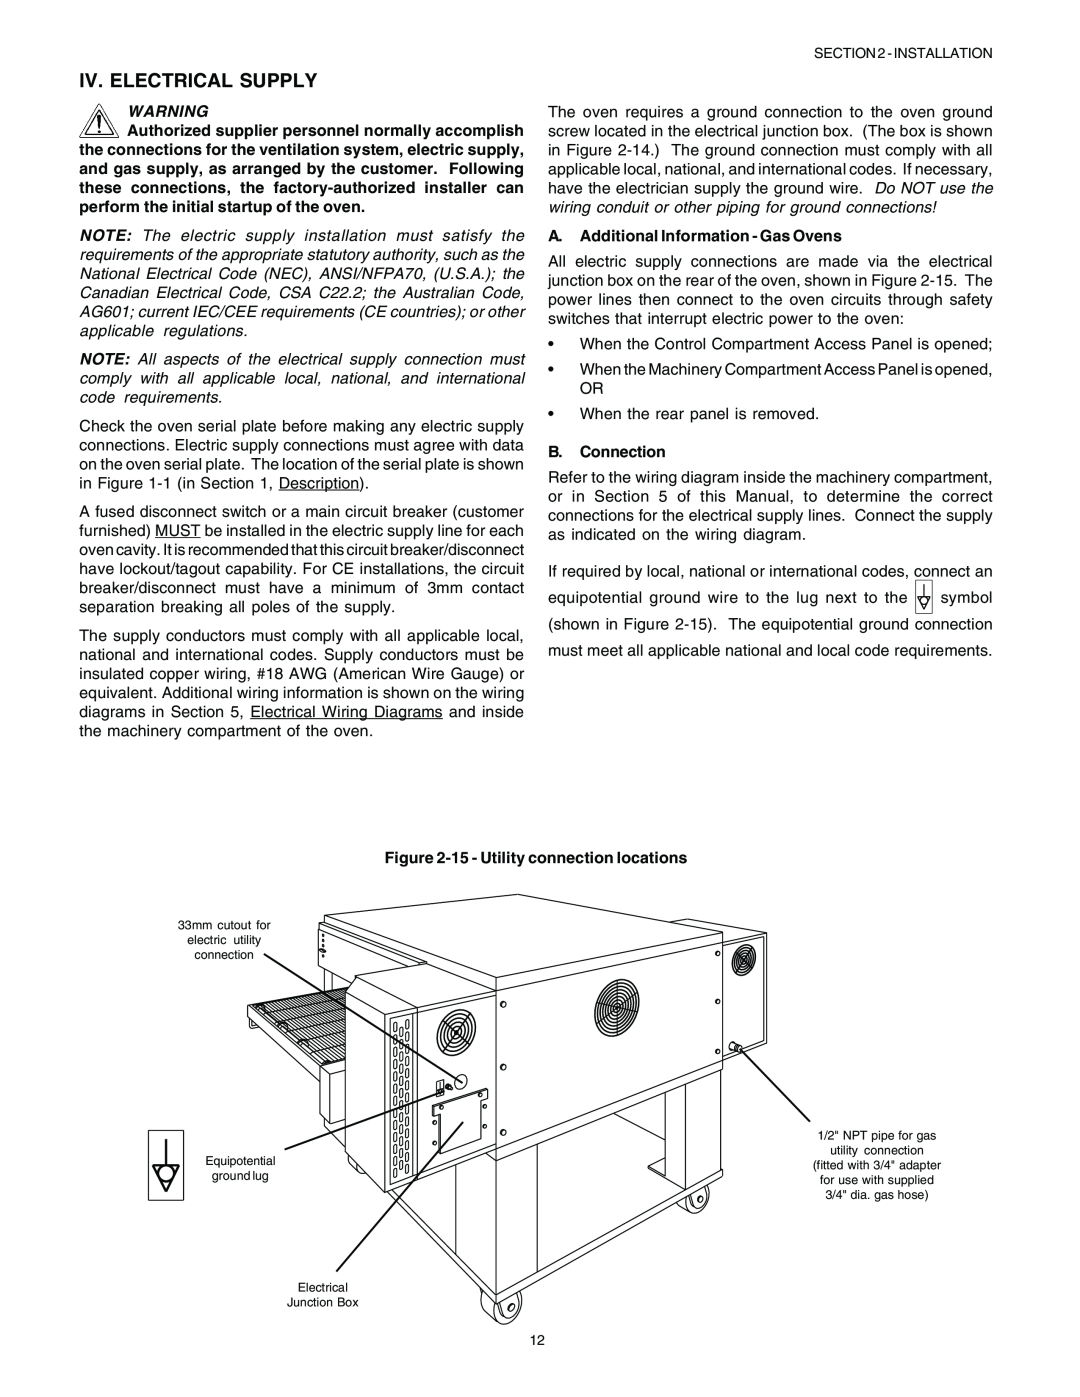 Blodgett BG2136 manual English, Iv. Electrical Supply, A. Additional Information - Gas Ovens, B. Connection 